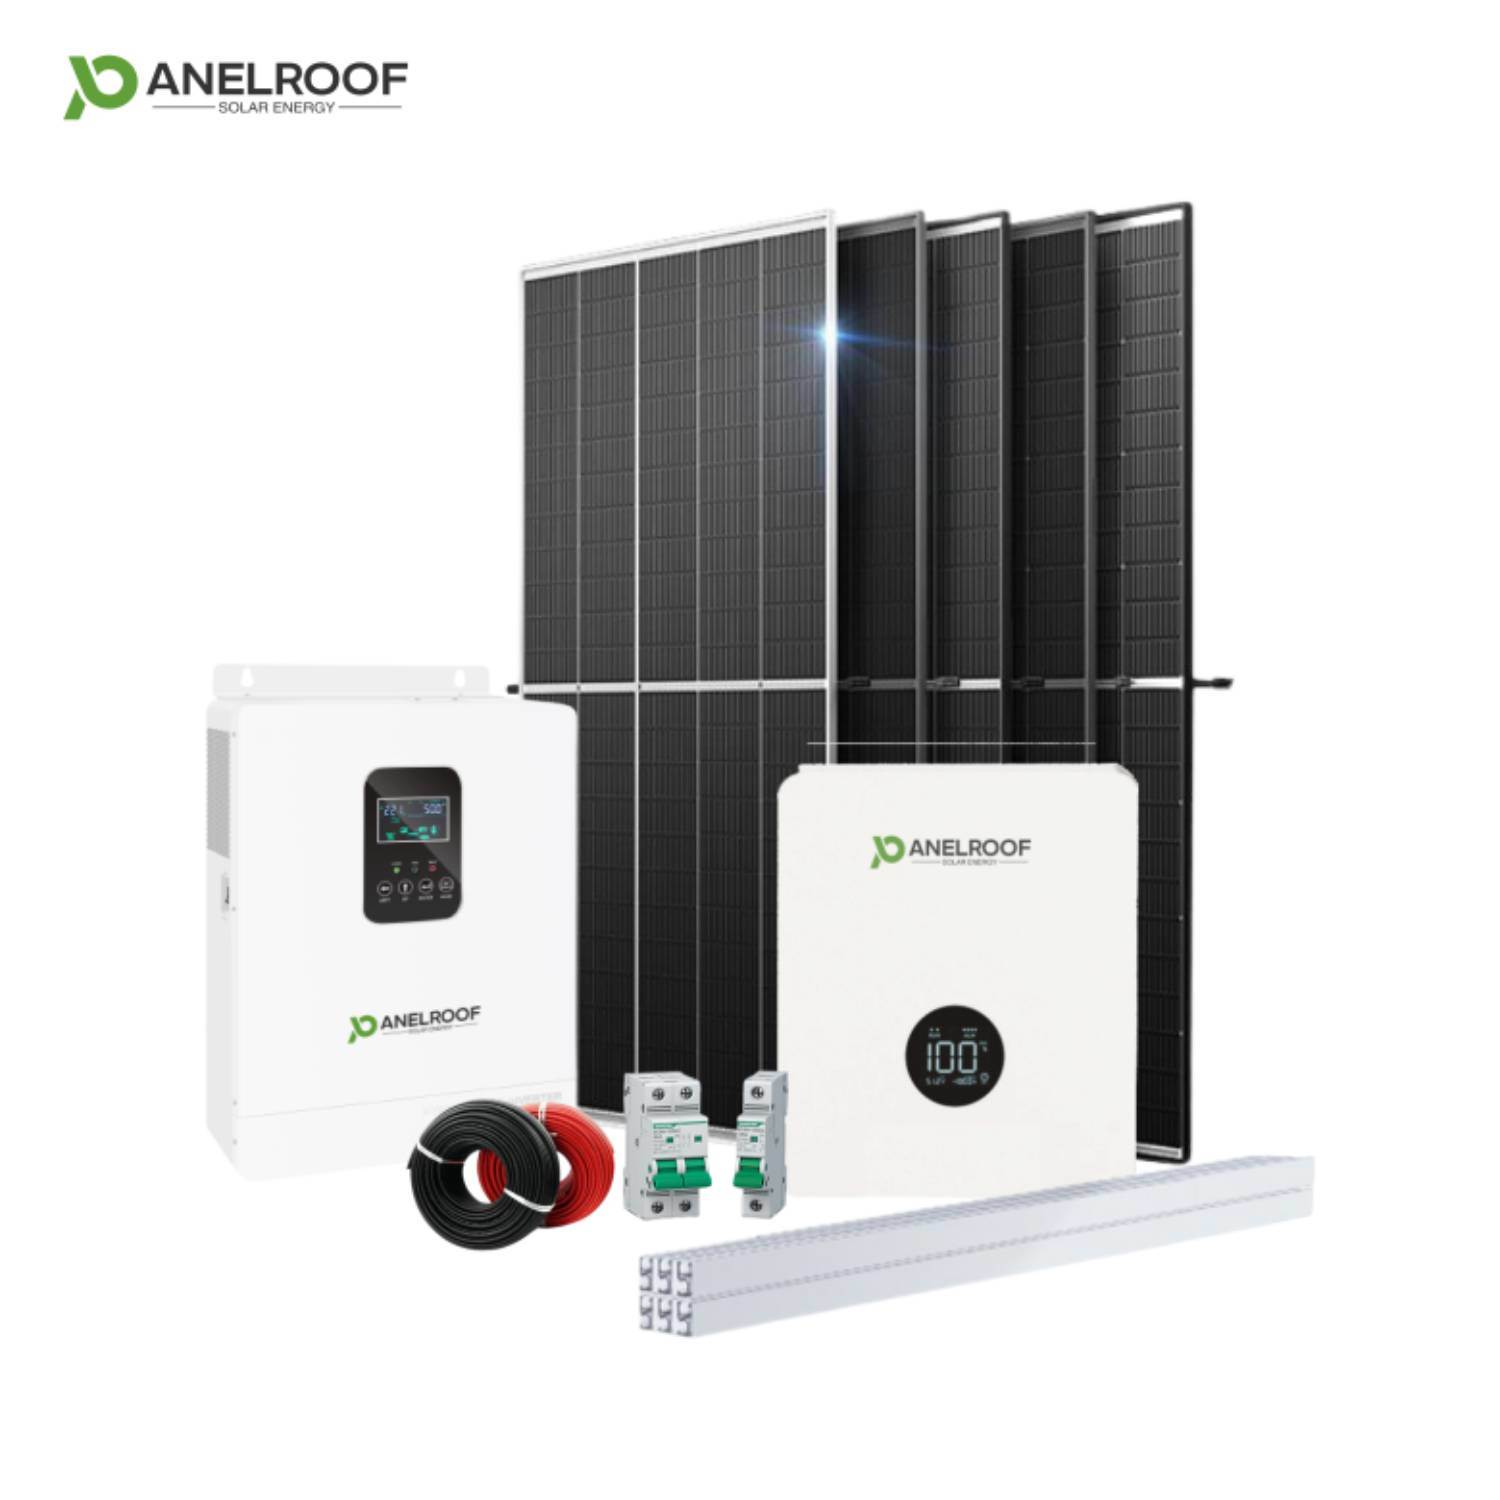 How to design an off-grid solar energy storage system?